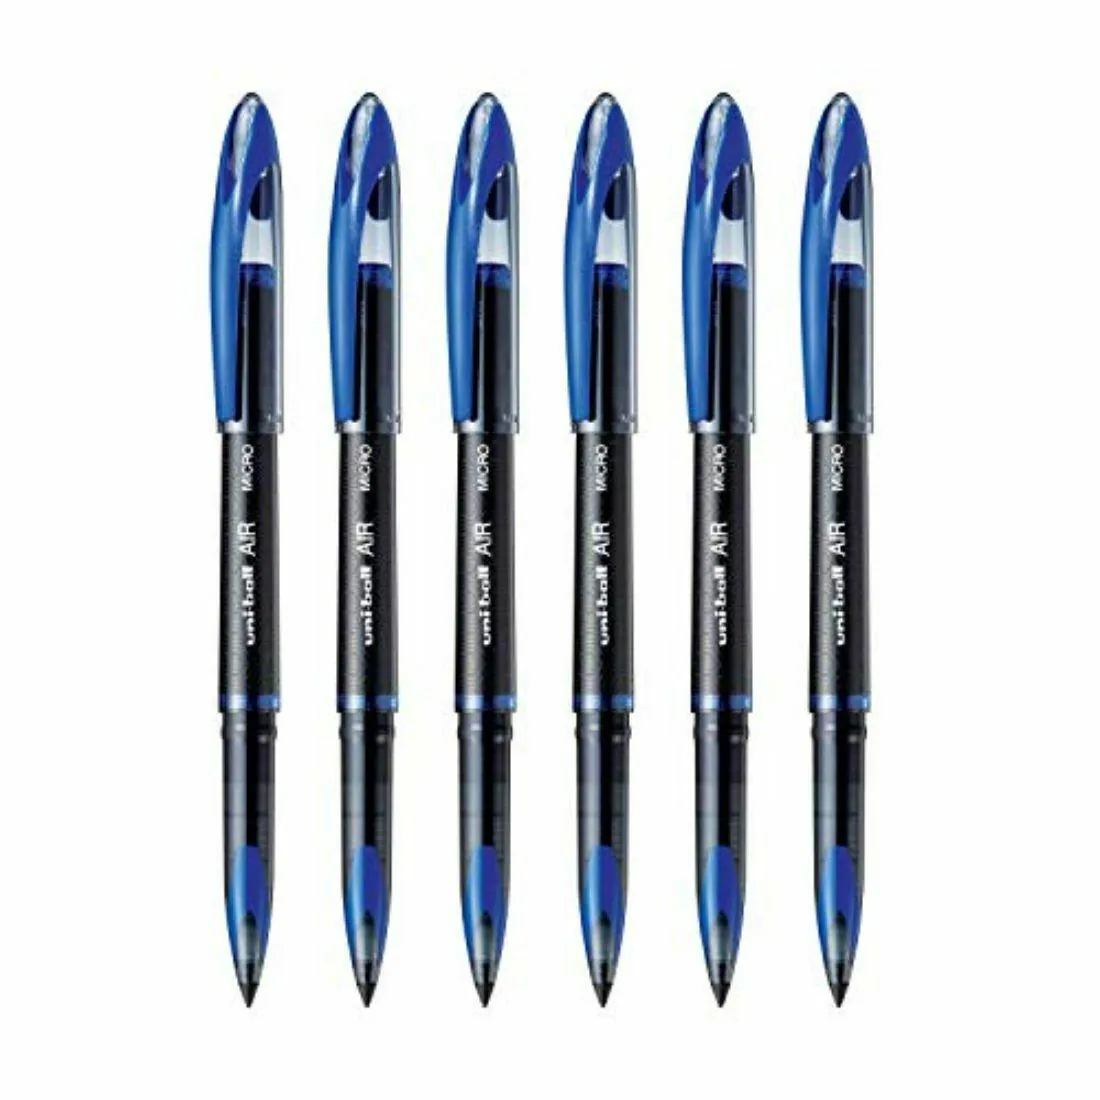 Blue Color Details about   10 Pieces Baoer Rollerball Pen Ink Refills Push Type 0.5 mm 